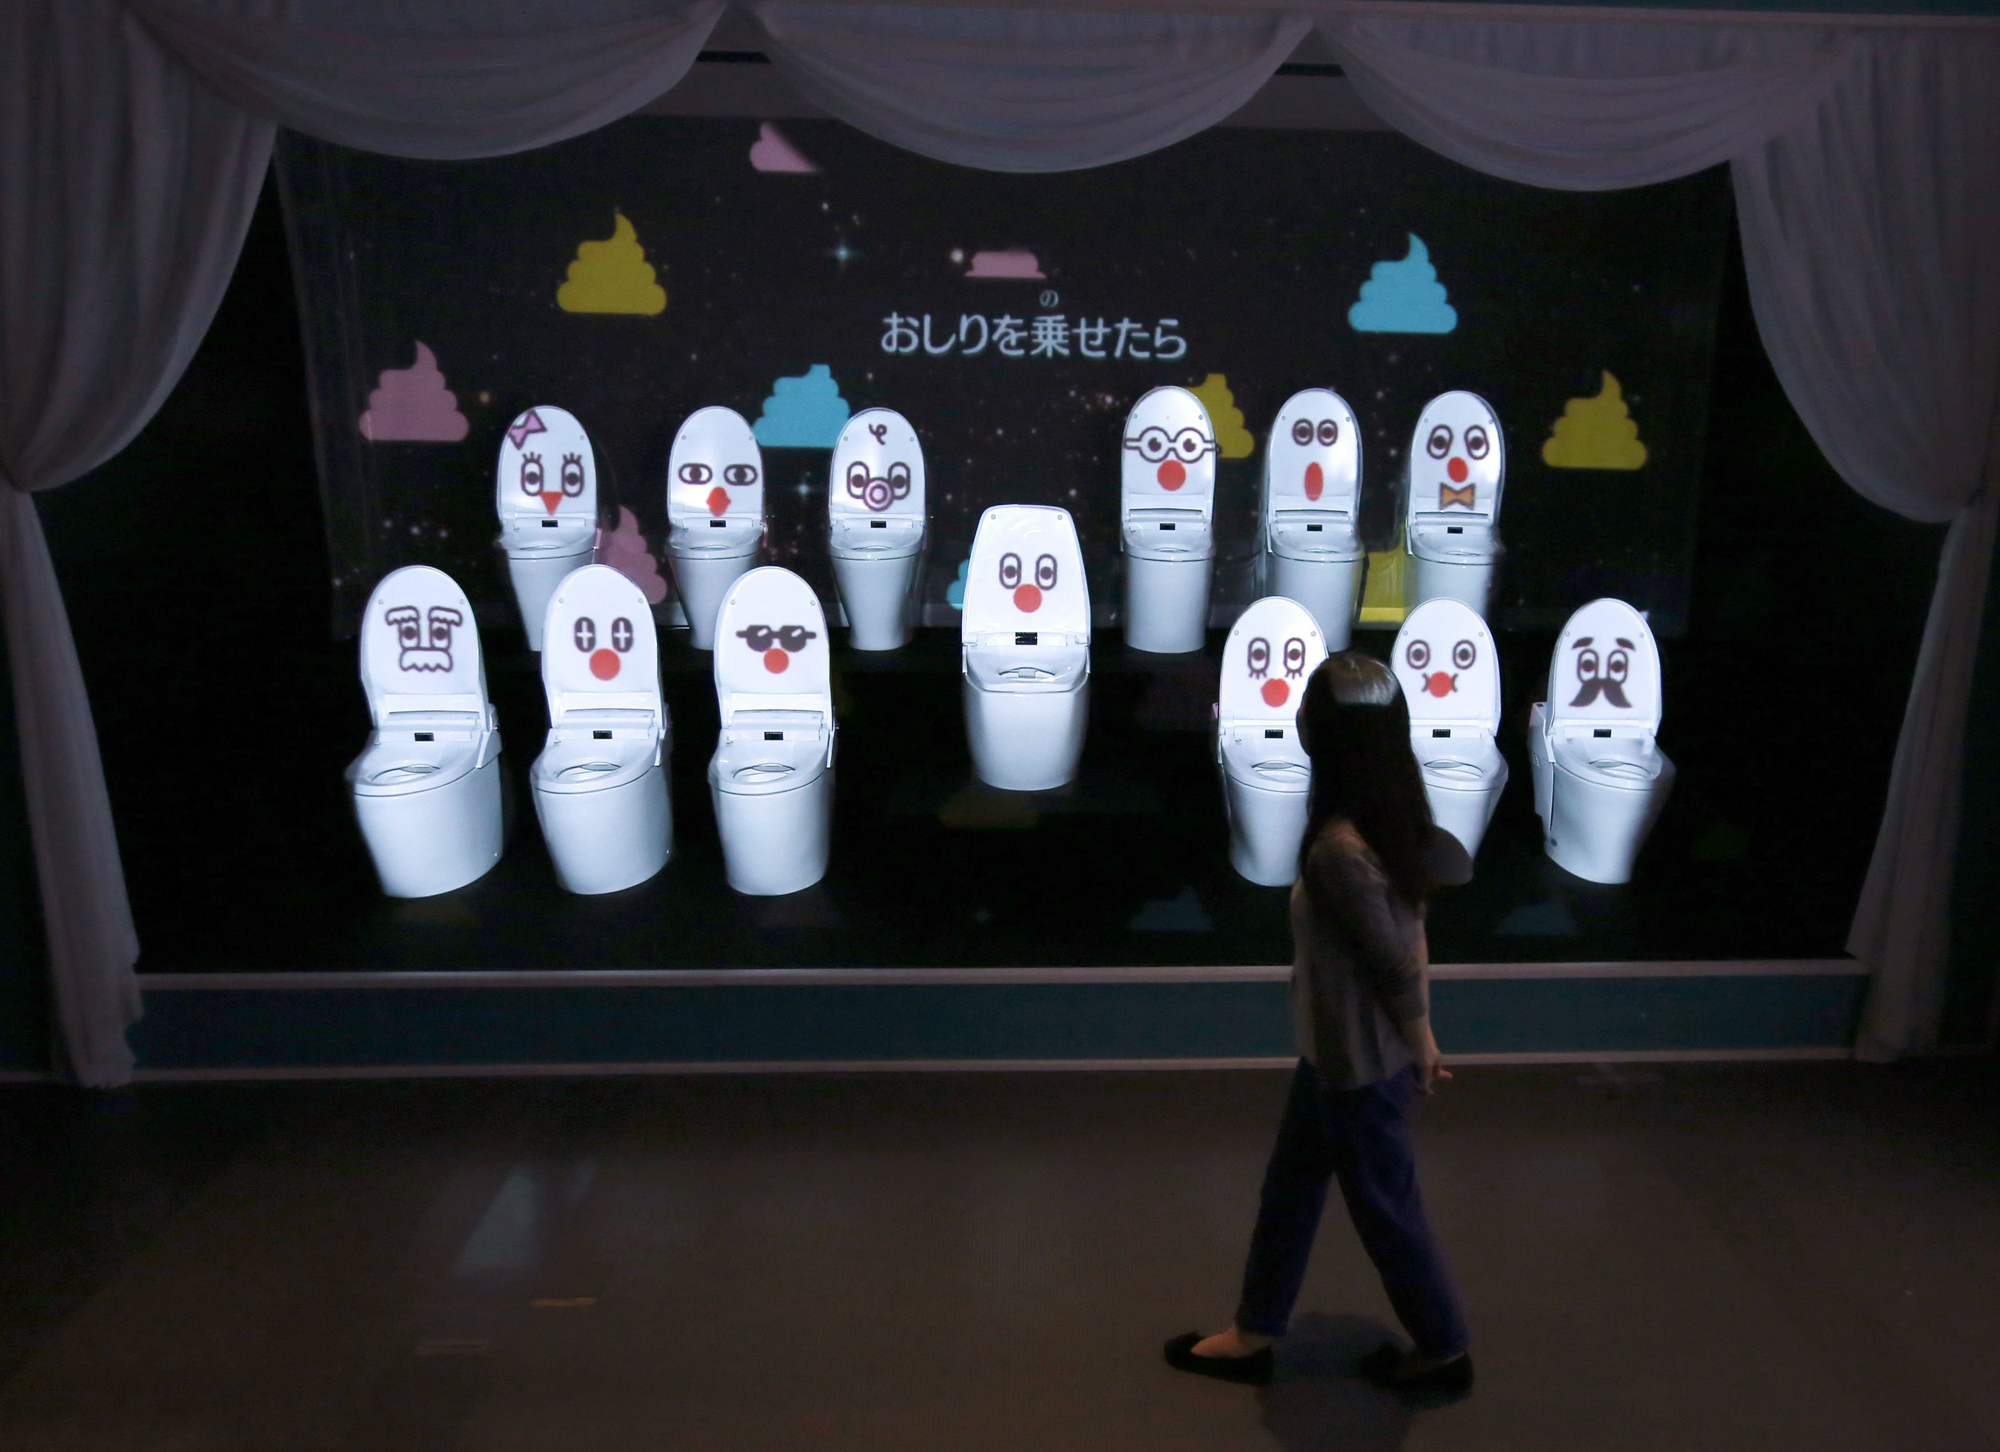 A woman walks past a choir of toilets that sing to thank visitors for putting in the effort of trying to learn more about what is normally a taboo topic of sitting on them, at an exhibition titled "Toilet !? Human Waste and Earth's Future" at the Miraikan National Museum of Emerging Science and Innovation in Tokyo July 3, 2014.